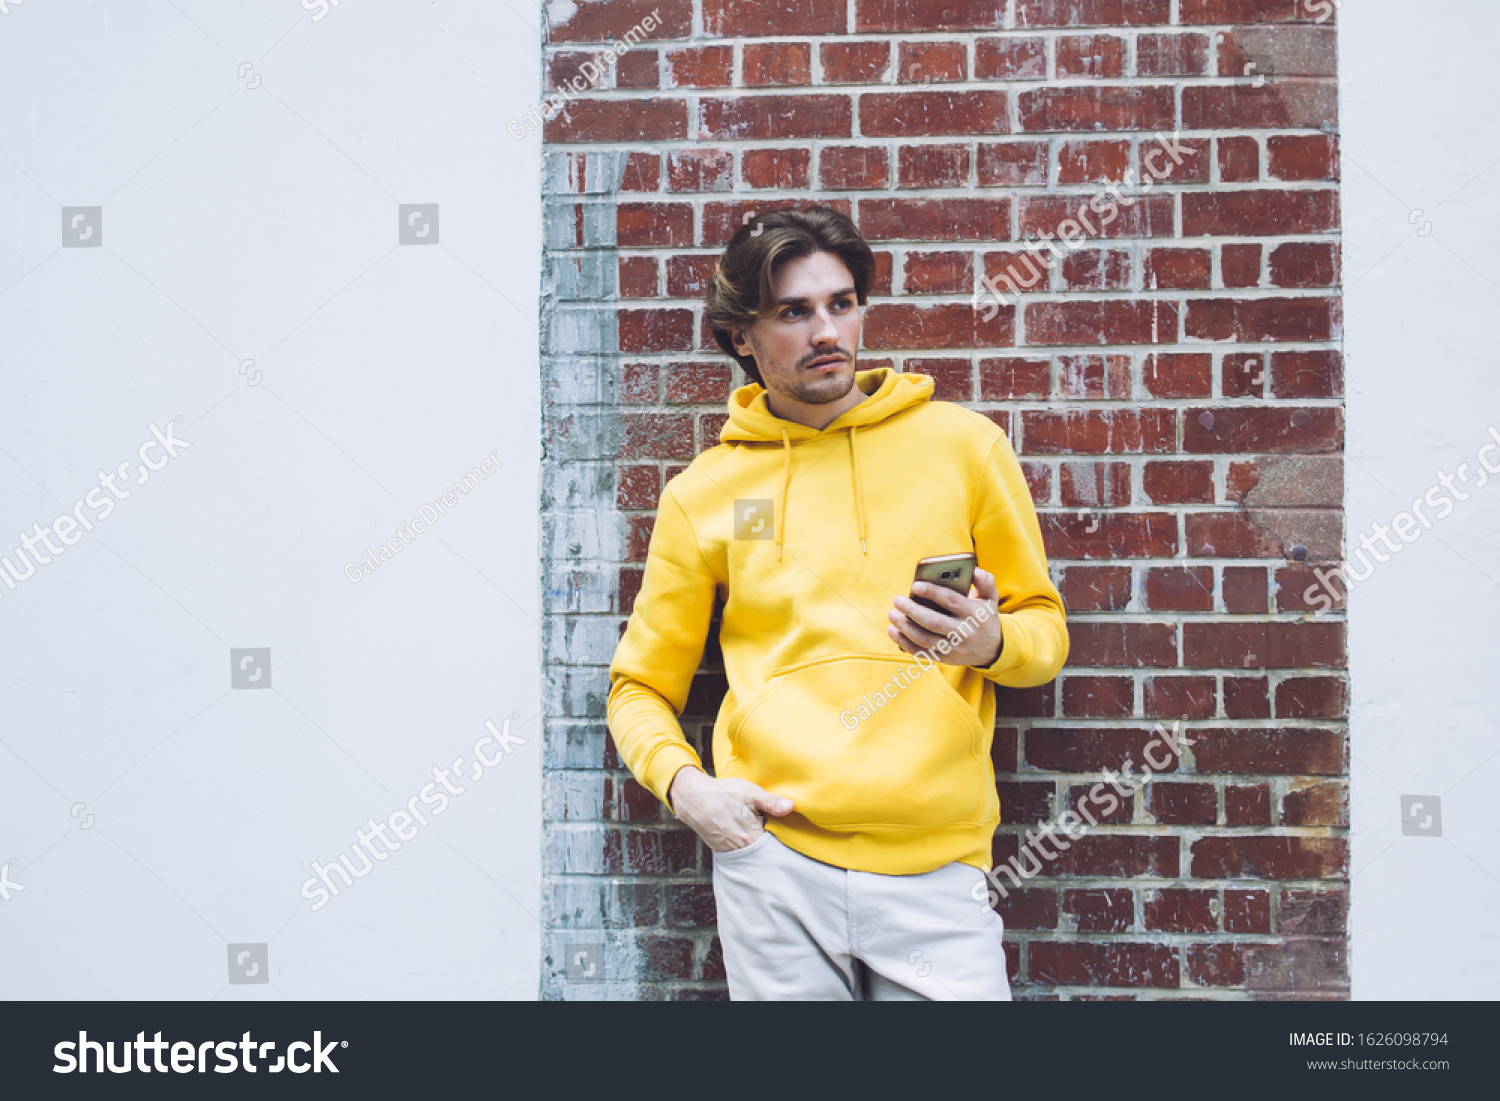 Pensive casually dressed young man in yellow sweatshirt standing back to brick wall with one hand in pocket while holding phone in other hand #1626098794